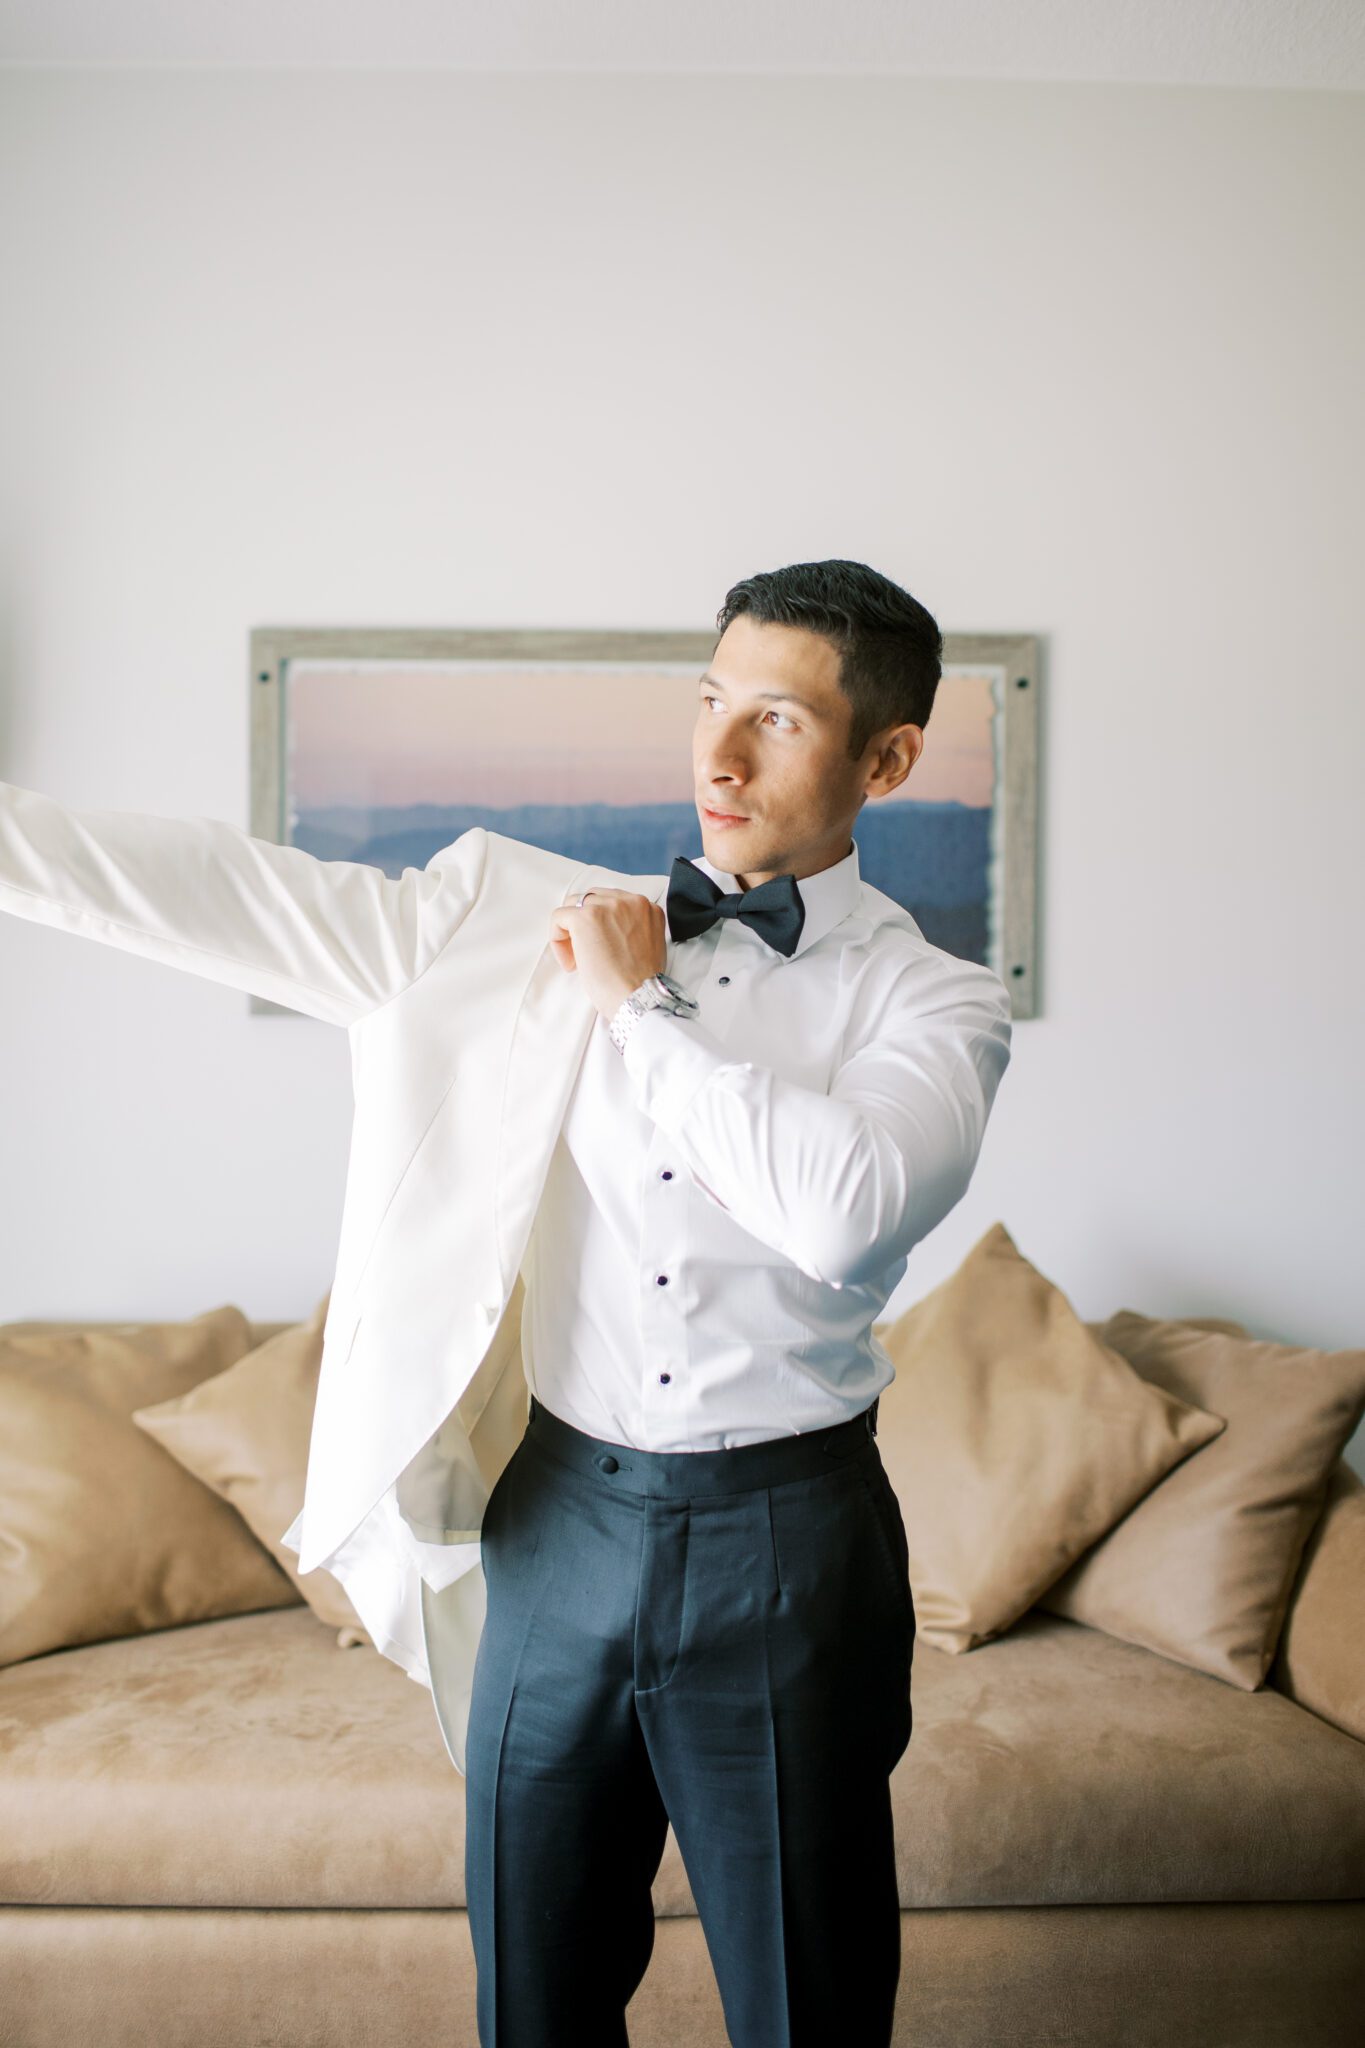 Groom getting ready on his wedding day at Sparrowlane Events. Elegant wedding inspiration. Classy white tux jacket and black pants by Atelier Suiting.